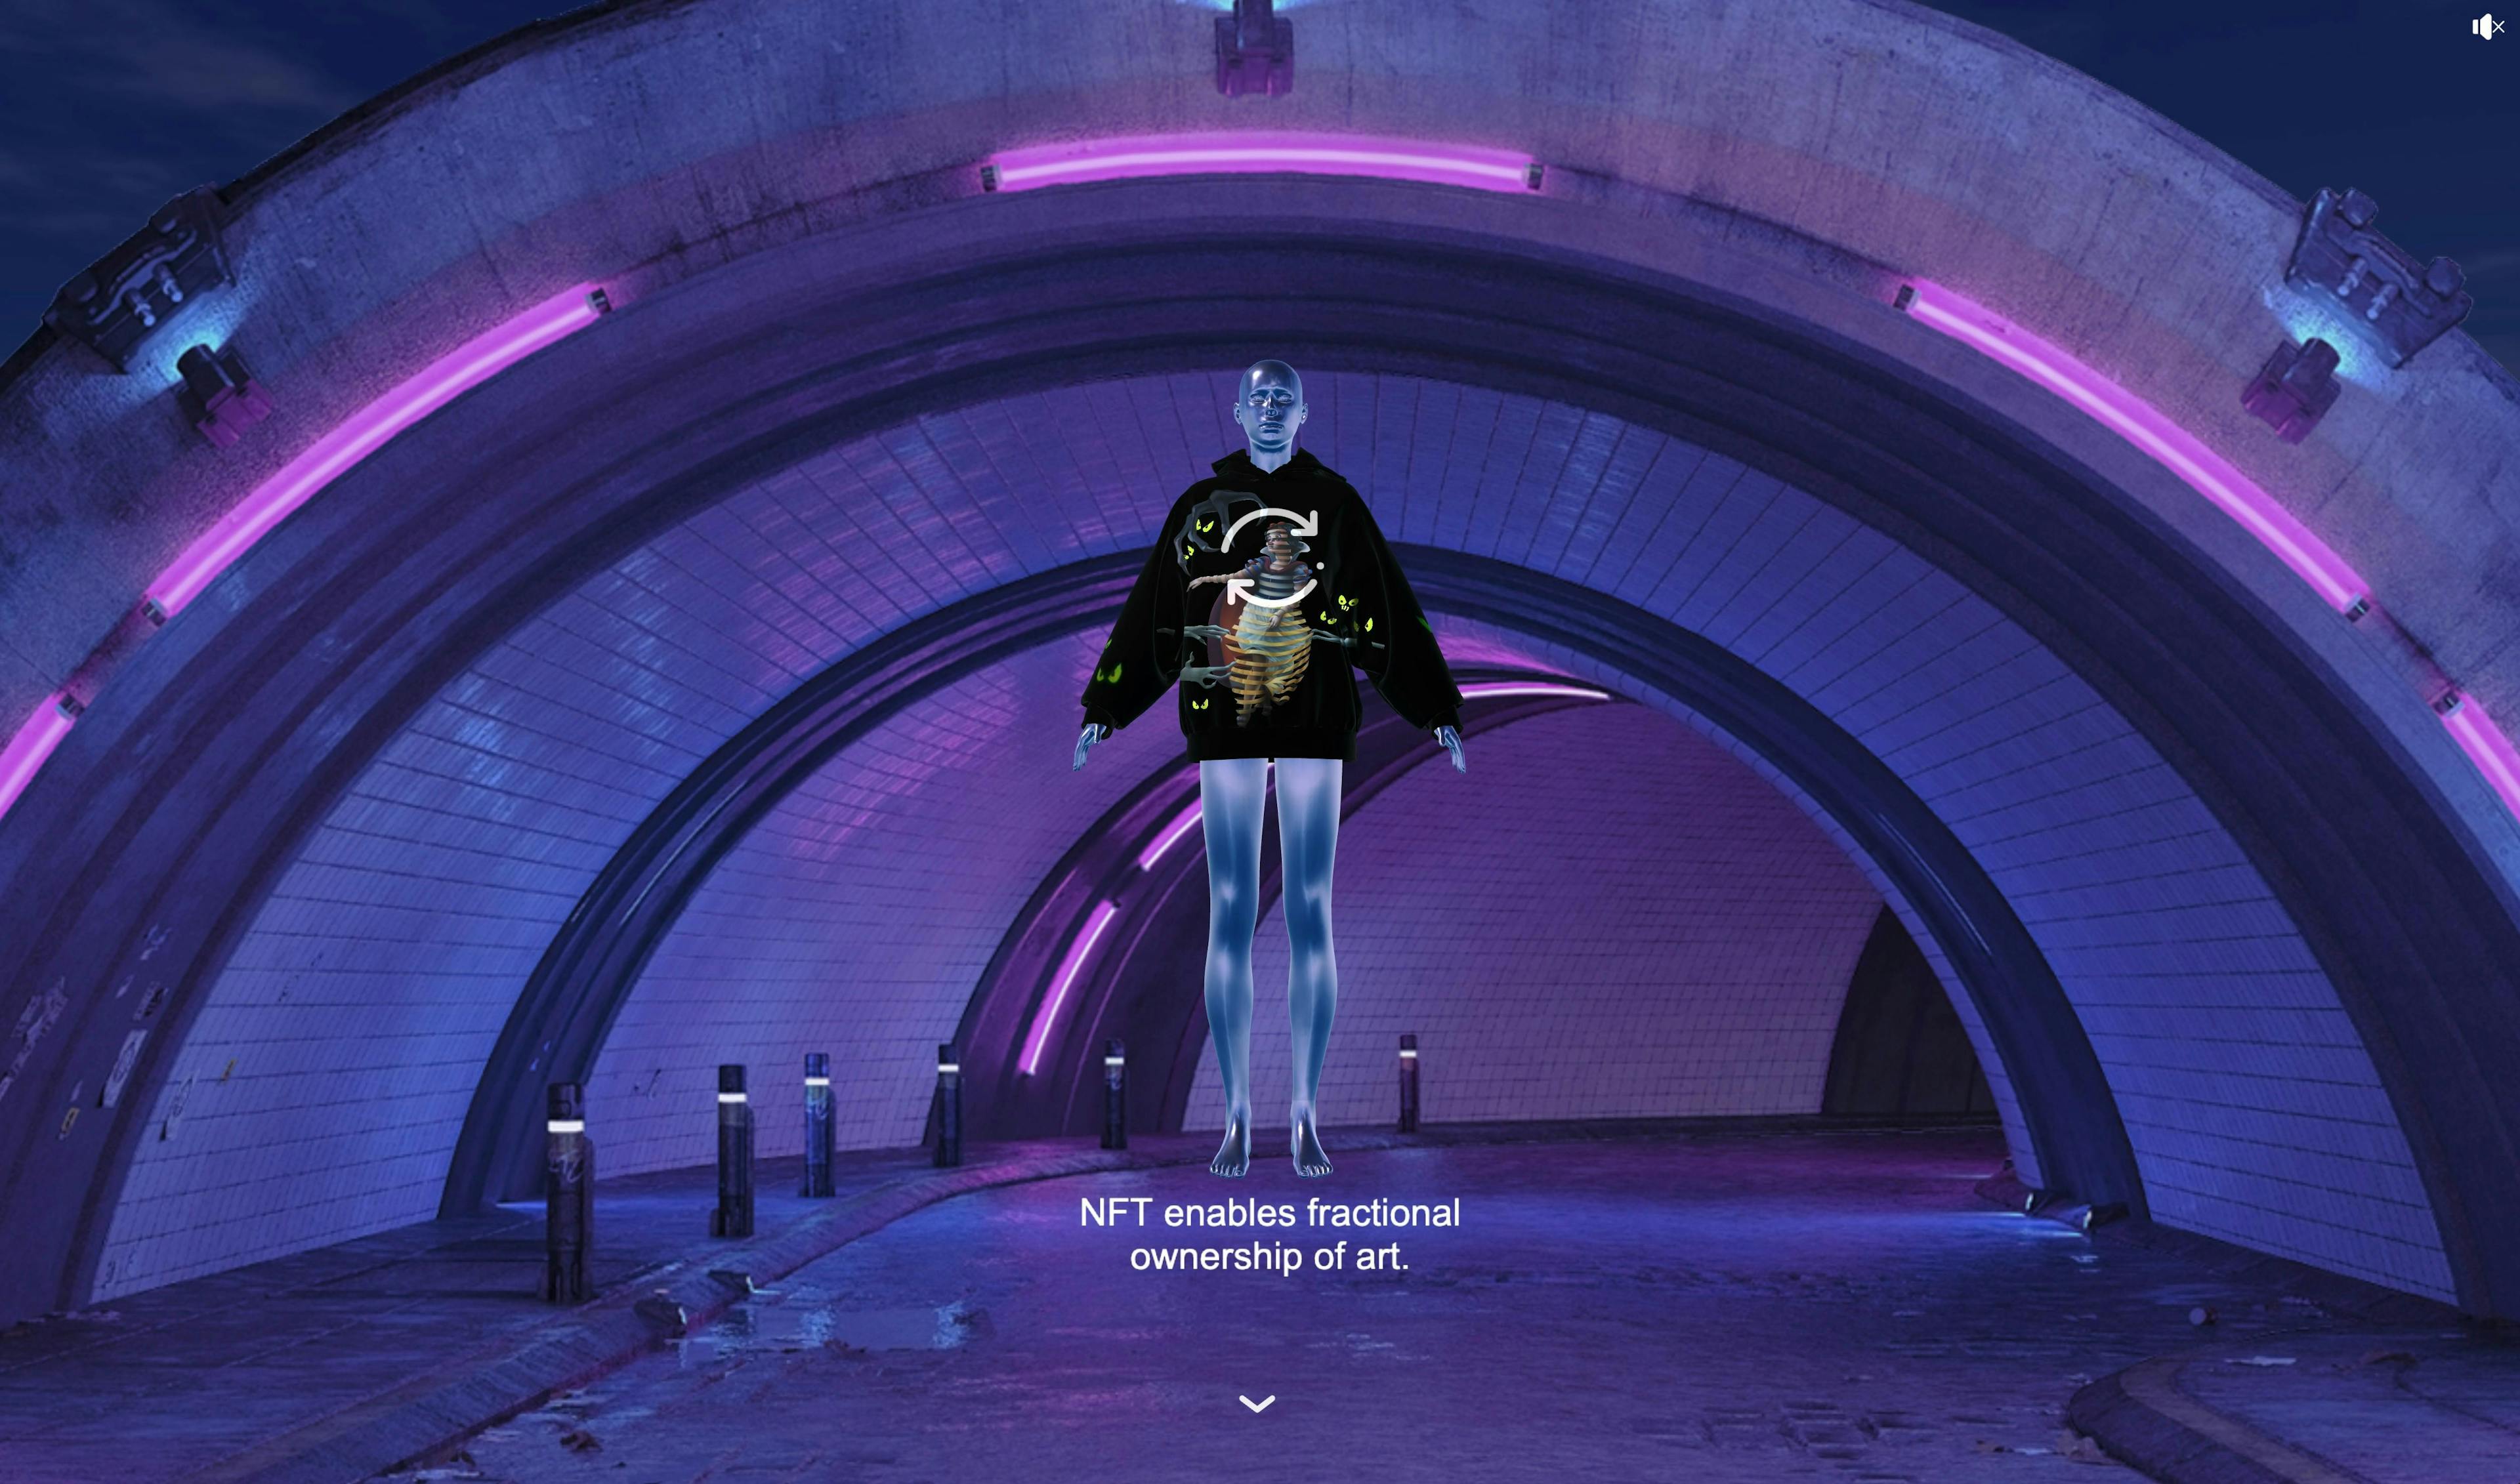 A vitreous person is wearing a black hoodie and floating in front of a cyberpunk tunnel background